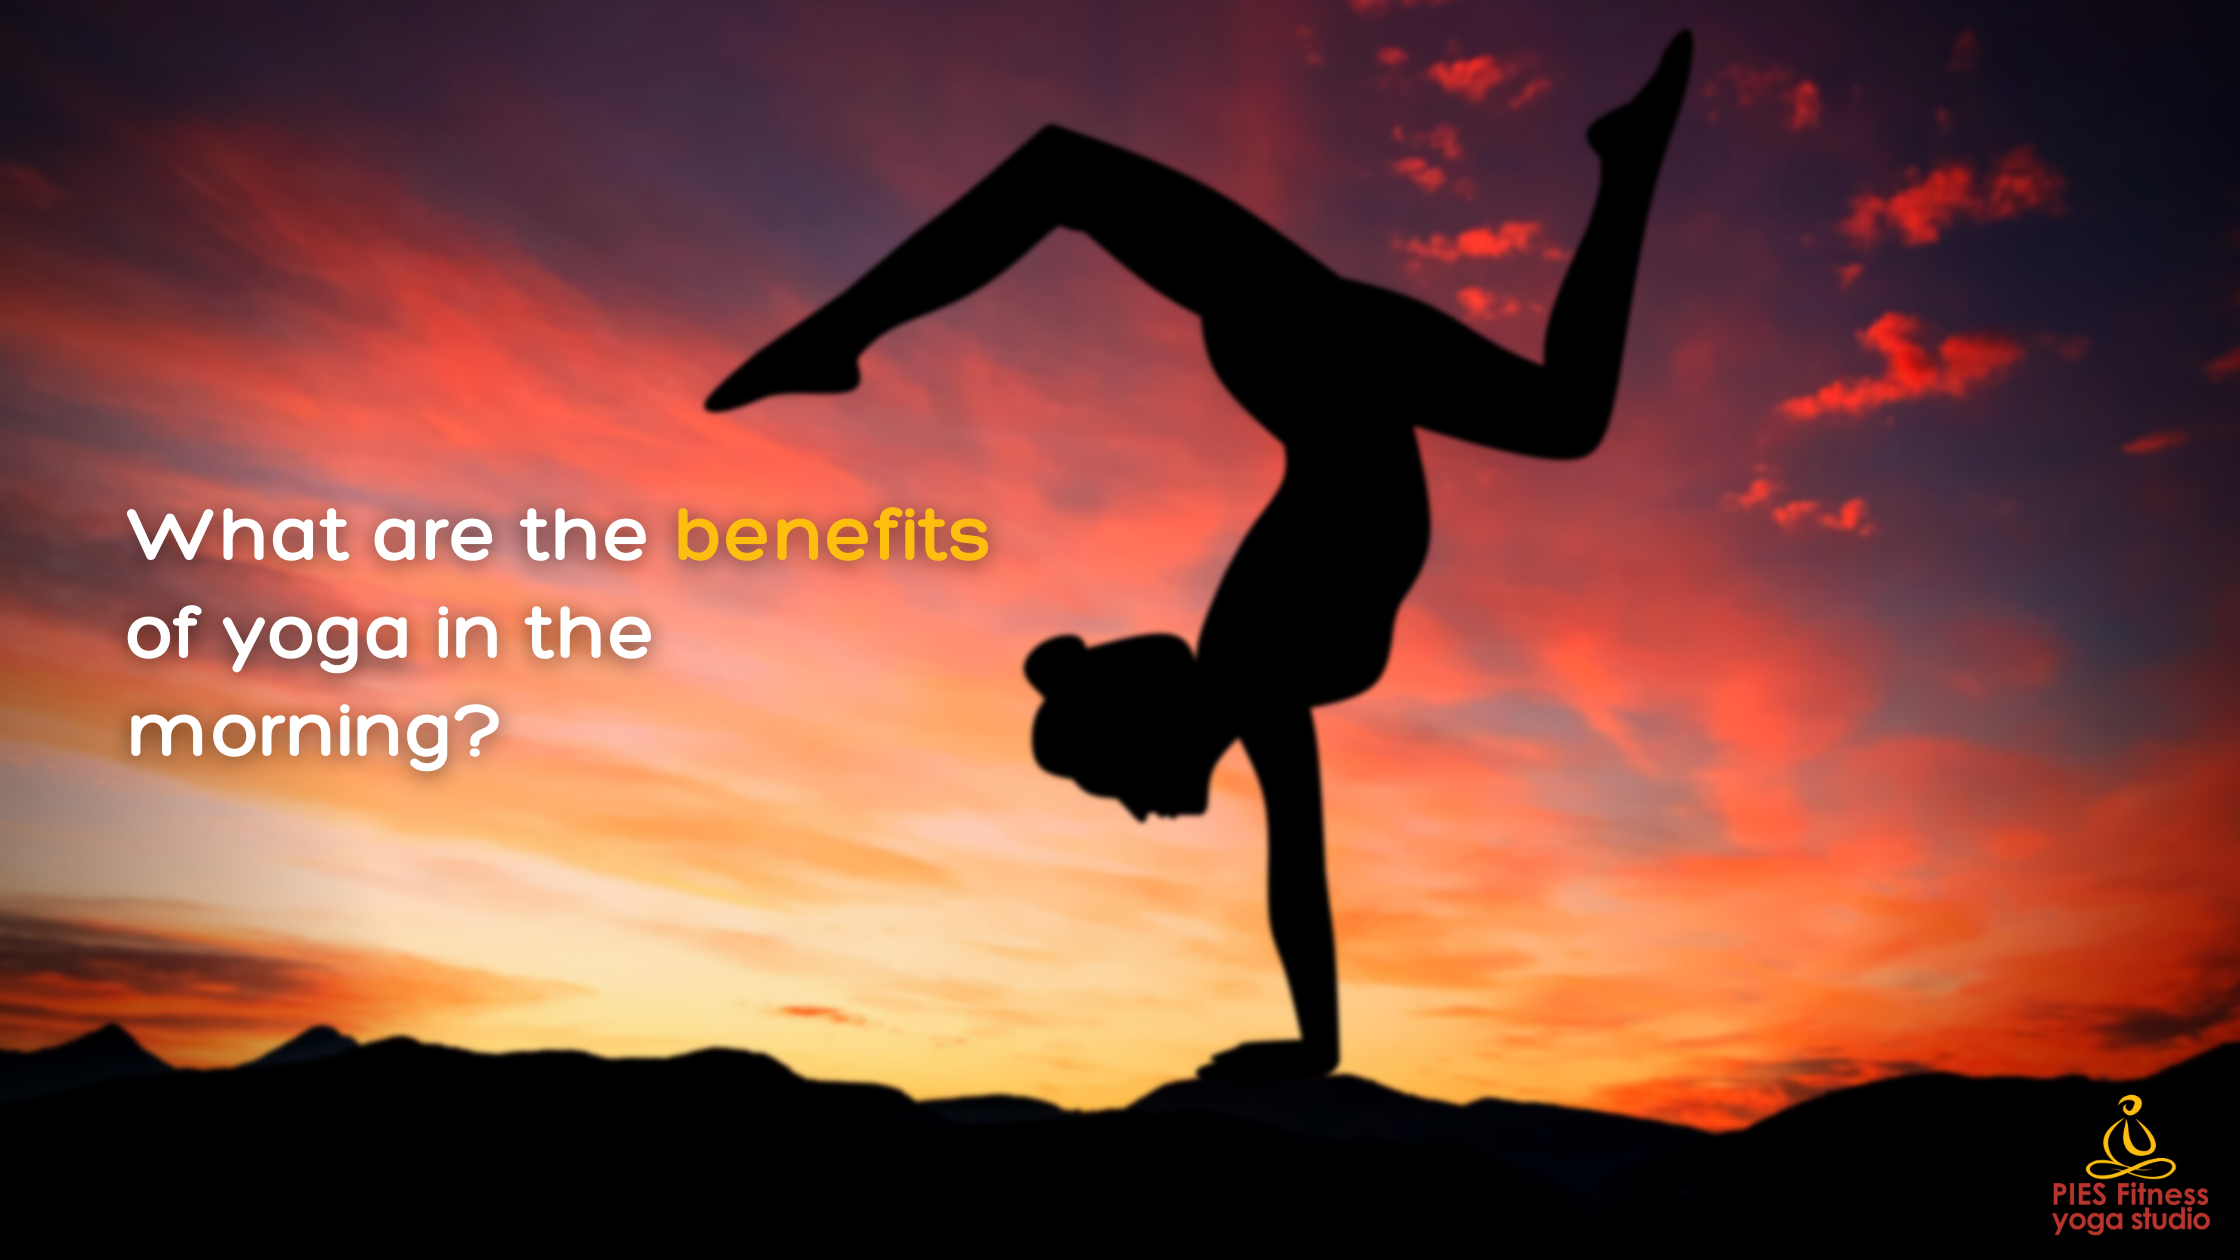 What are the Benefits of Yoga in the Morning?